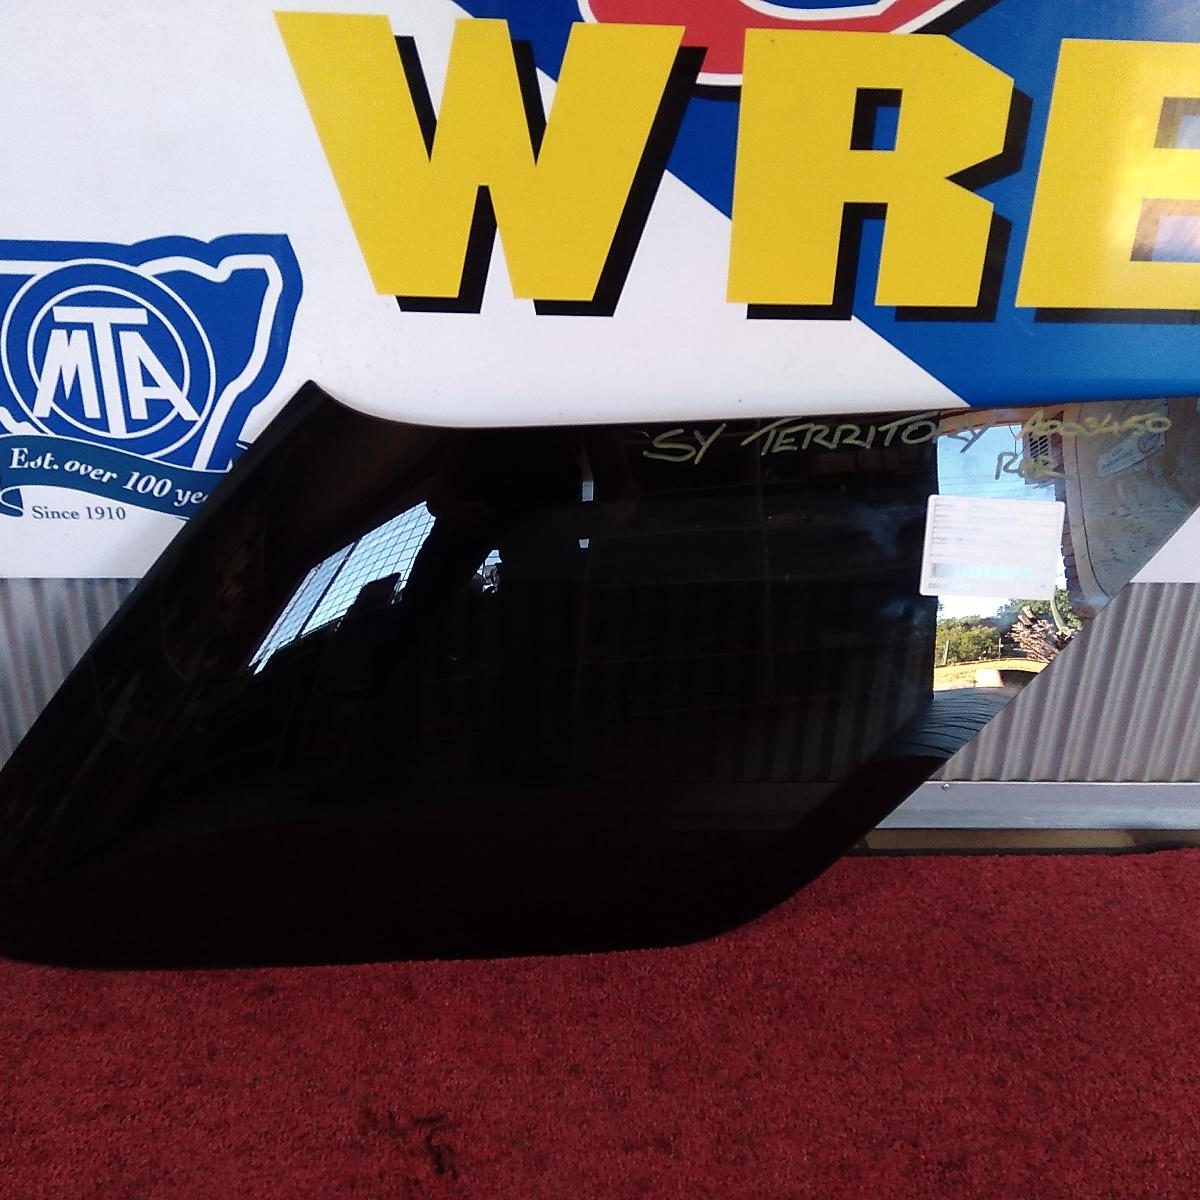 2009 FORD TERRITORY RIGHT REAR SIDE GLASS